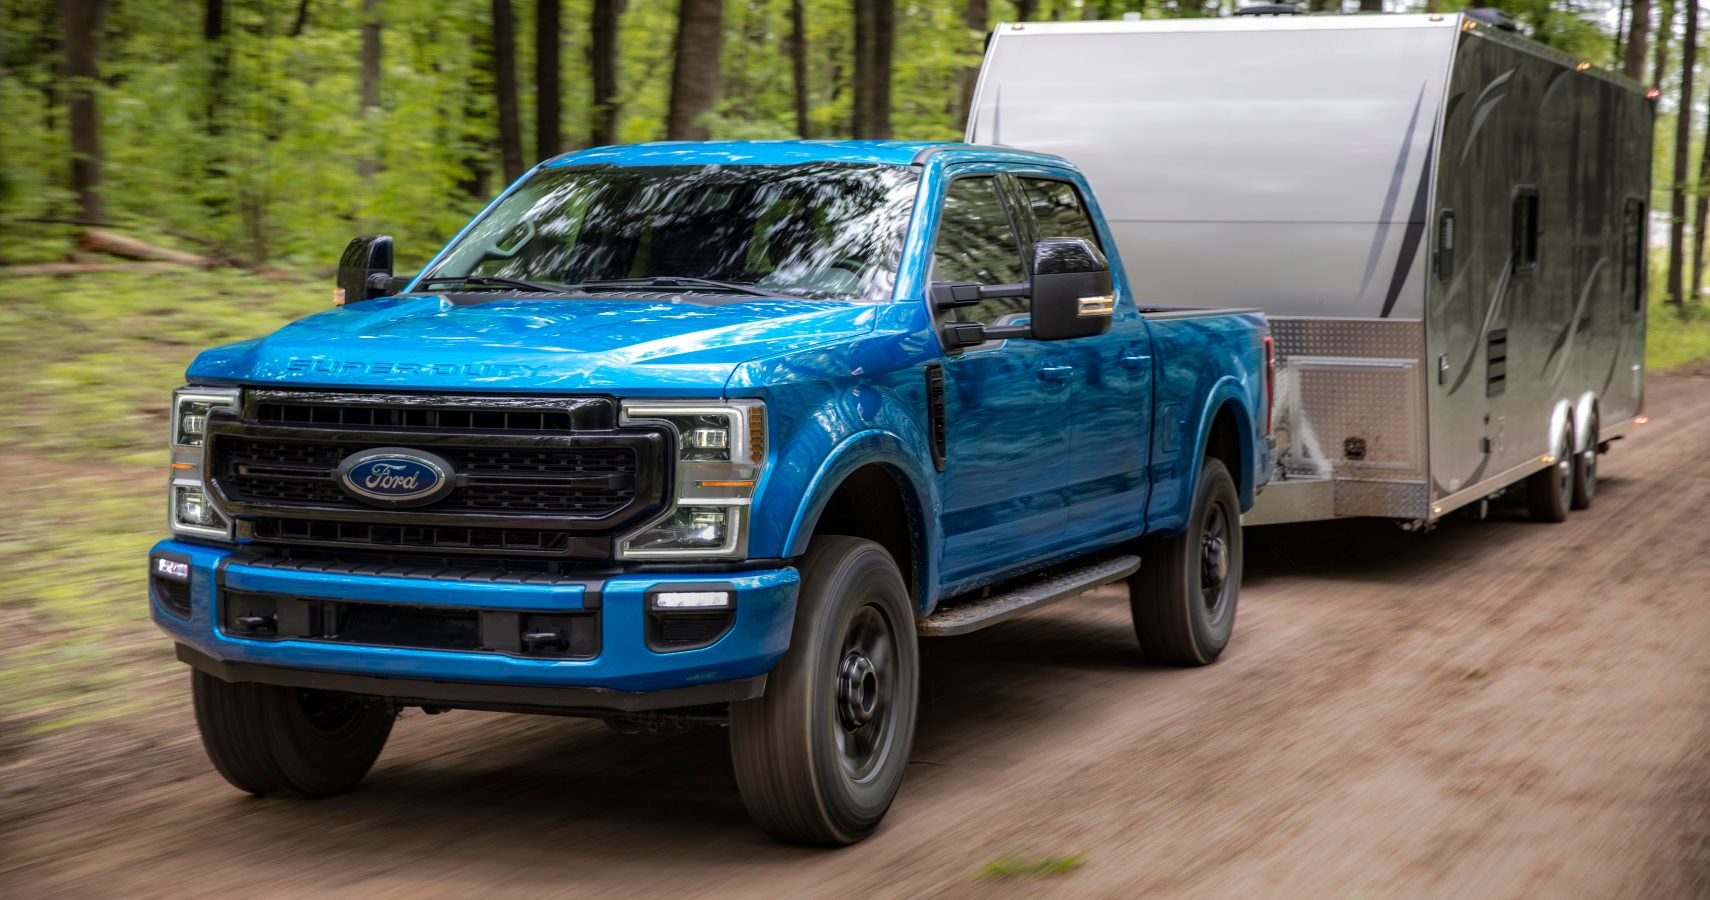 Ford F-Series, America???s best-selling truck for 42 years, is once again raising the bar for capability with its all-new 7.3-liter V8 gasoline engine. The 7.3-liter engine in Super Duty pickup cranks out best-in-class gas V8 output of 430 horsepower at 5,500 rpm and best-in-class torque of 475 ft.-lb. at 4,000 rpm.